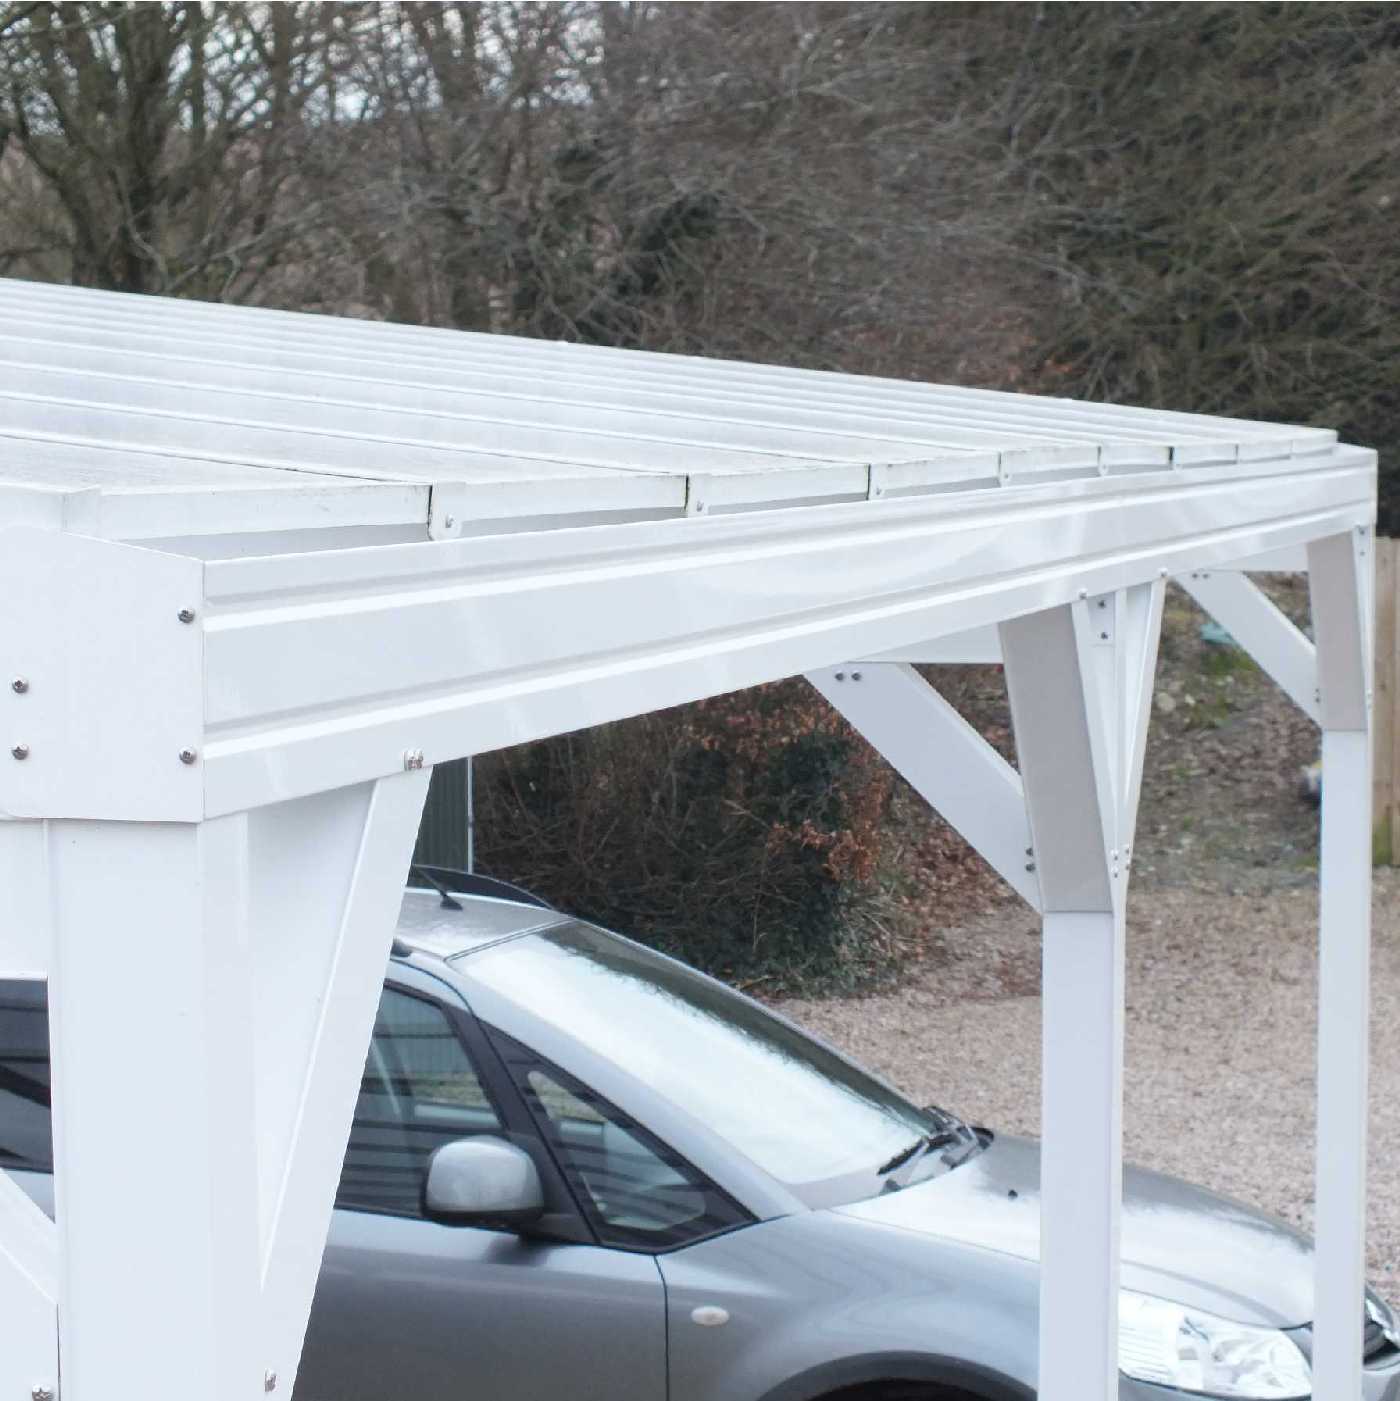 Omega Smart Free-Standing, White MonoPitch Roof Canopy with 6mm Glass Clear Plate Polycarbonate Glazing - 7.0m (W) x 2.0m (P), (8) Supporting Posts from Omega Build